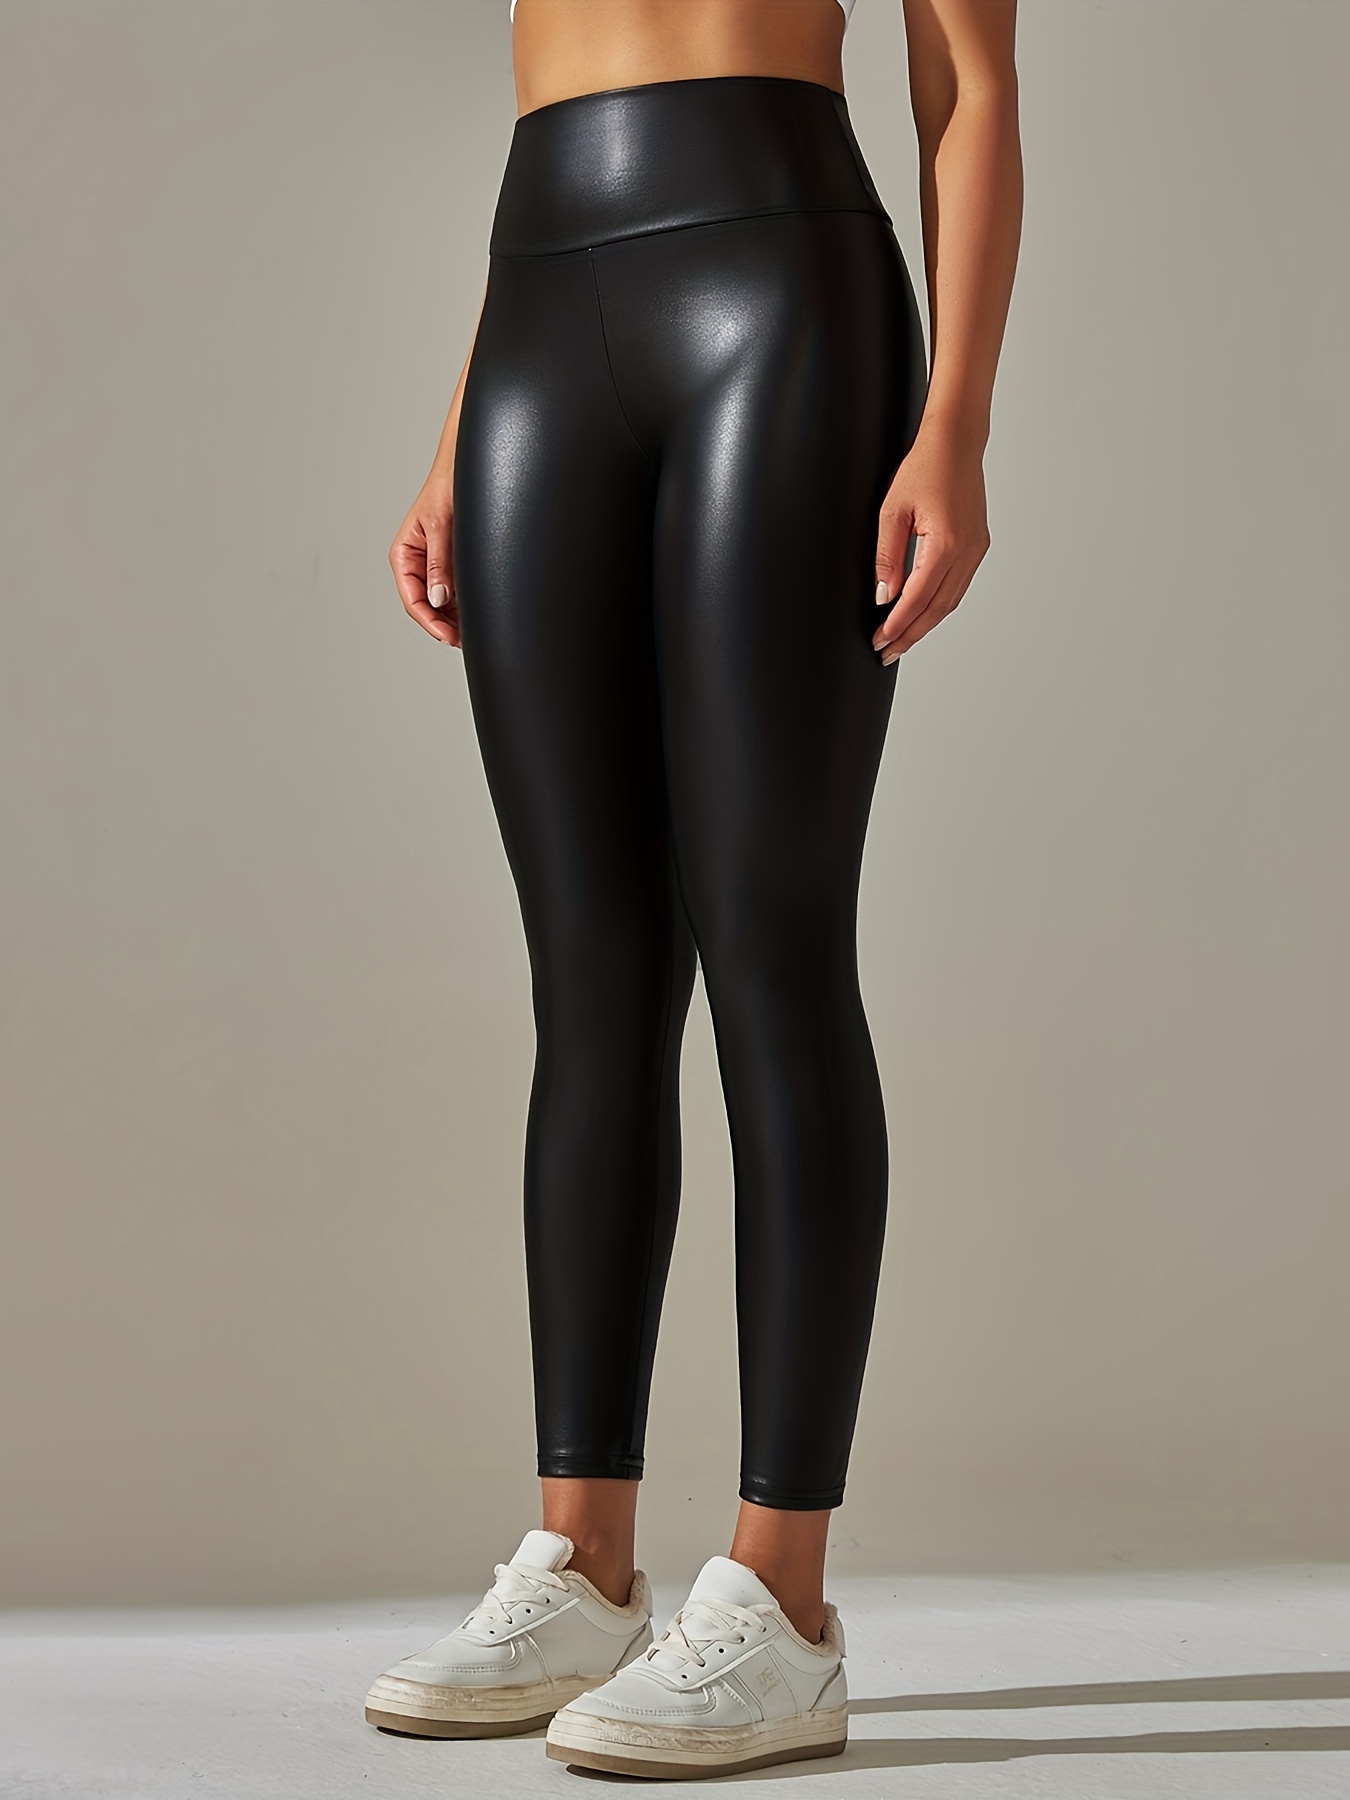 Sexy Womens Trousers Tight Leggings Casual Leather Elastic Pants